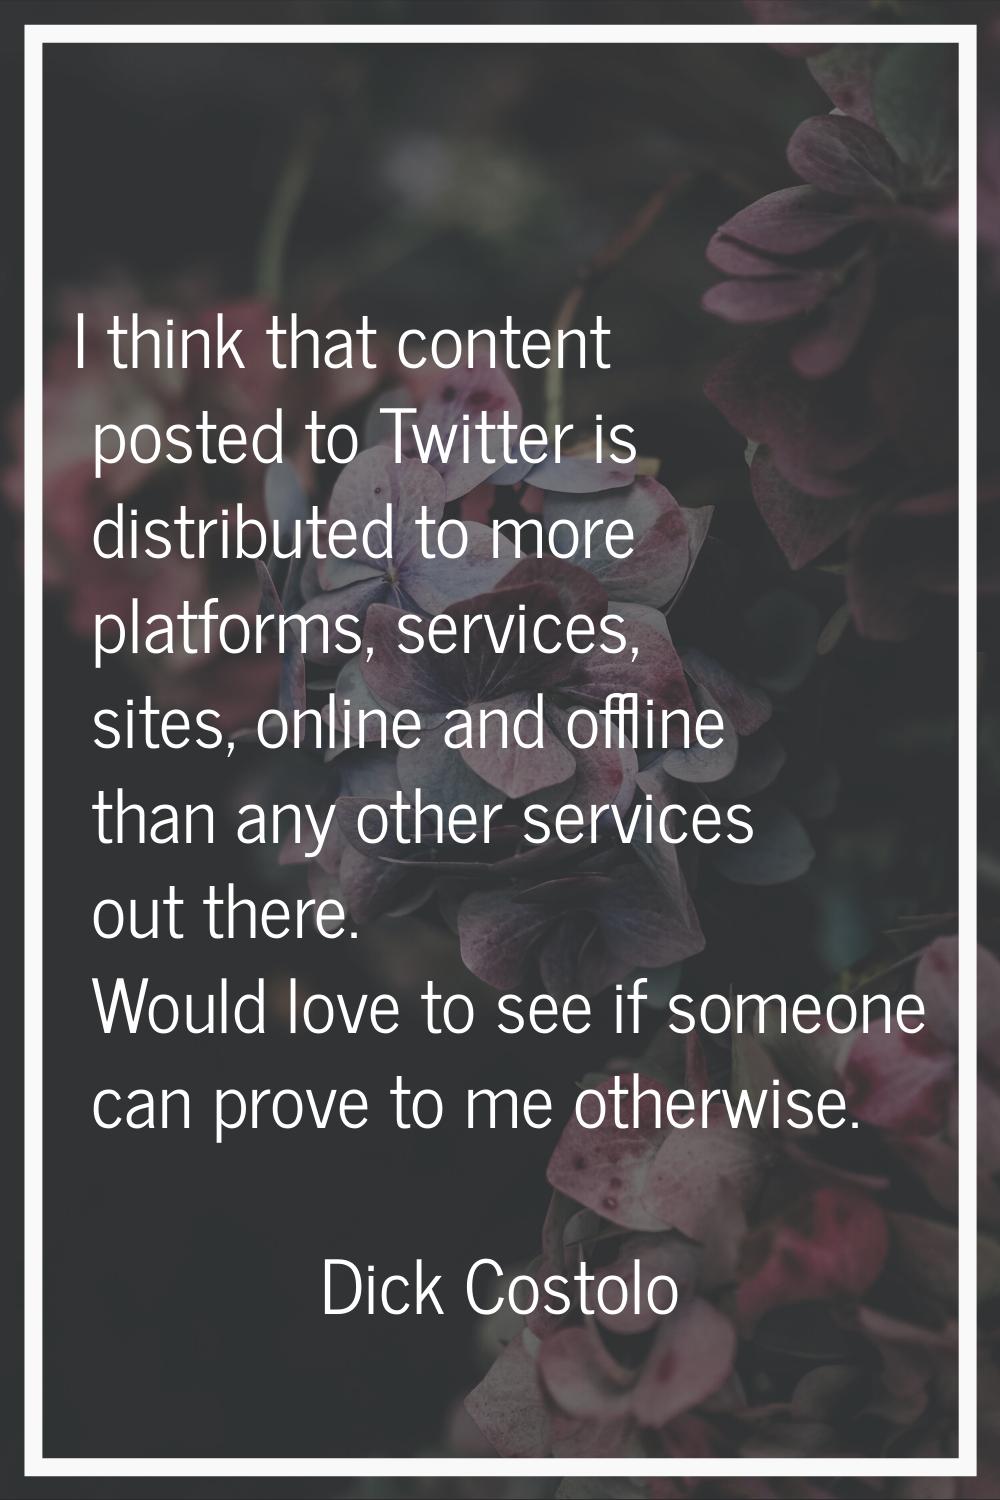 I think that content posted to Twitter is distributed to more platforms, services, sites, online an